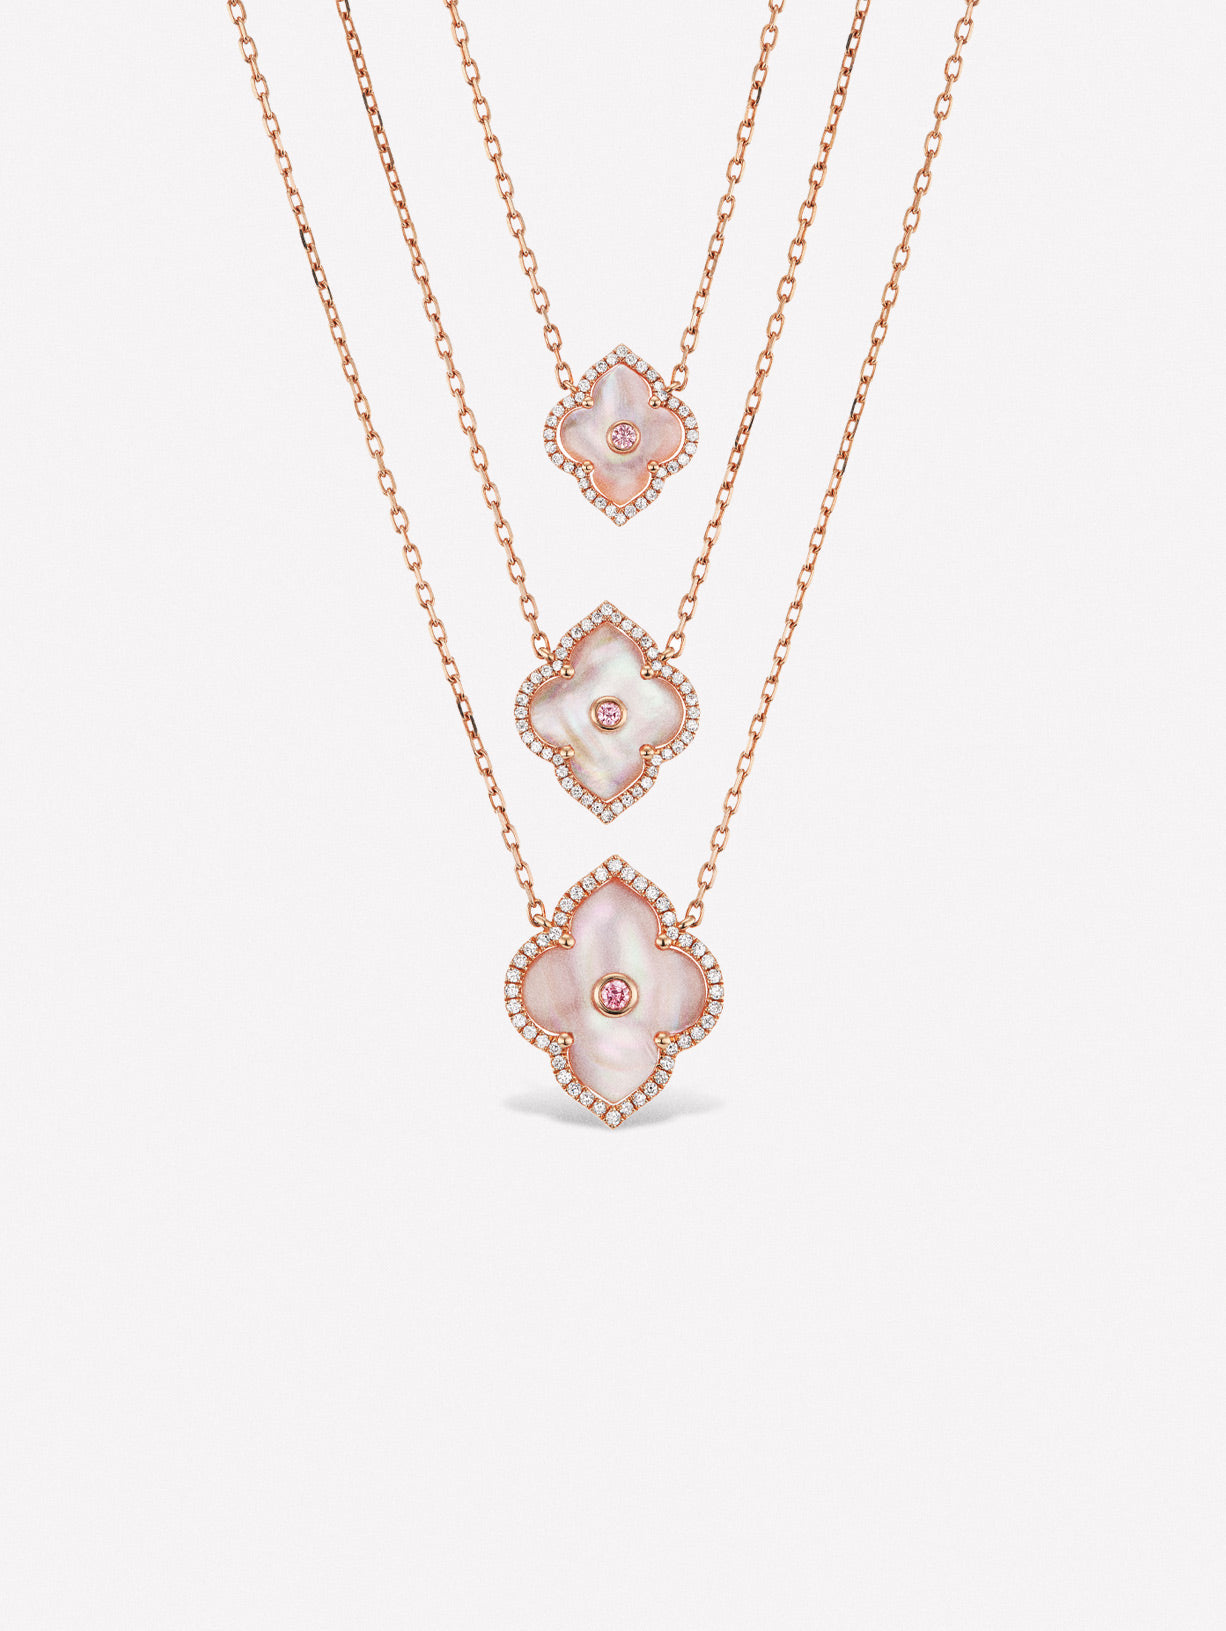 Argyle Pink™ Diamond and Mother of Pearl Medium Necklace - Pink Diamonds, J FINE - J Fine, Necklaces - Pink Diamond Jewelry, argyle-pink™-diamond-and-mother-of-pearl-medium-necklace-by-j-